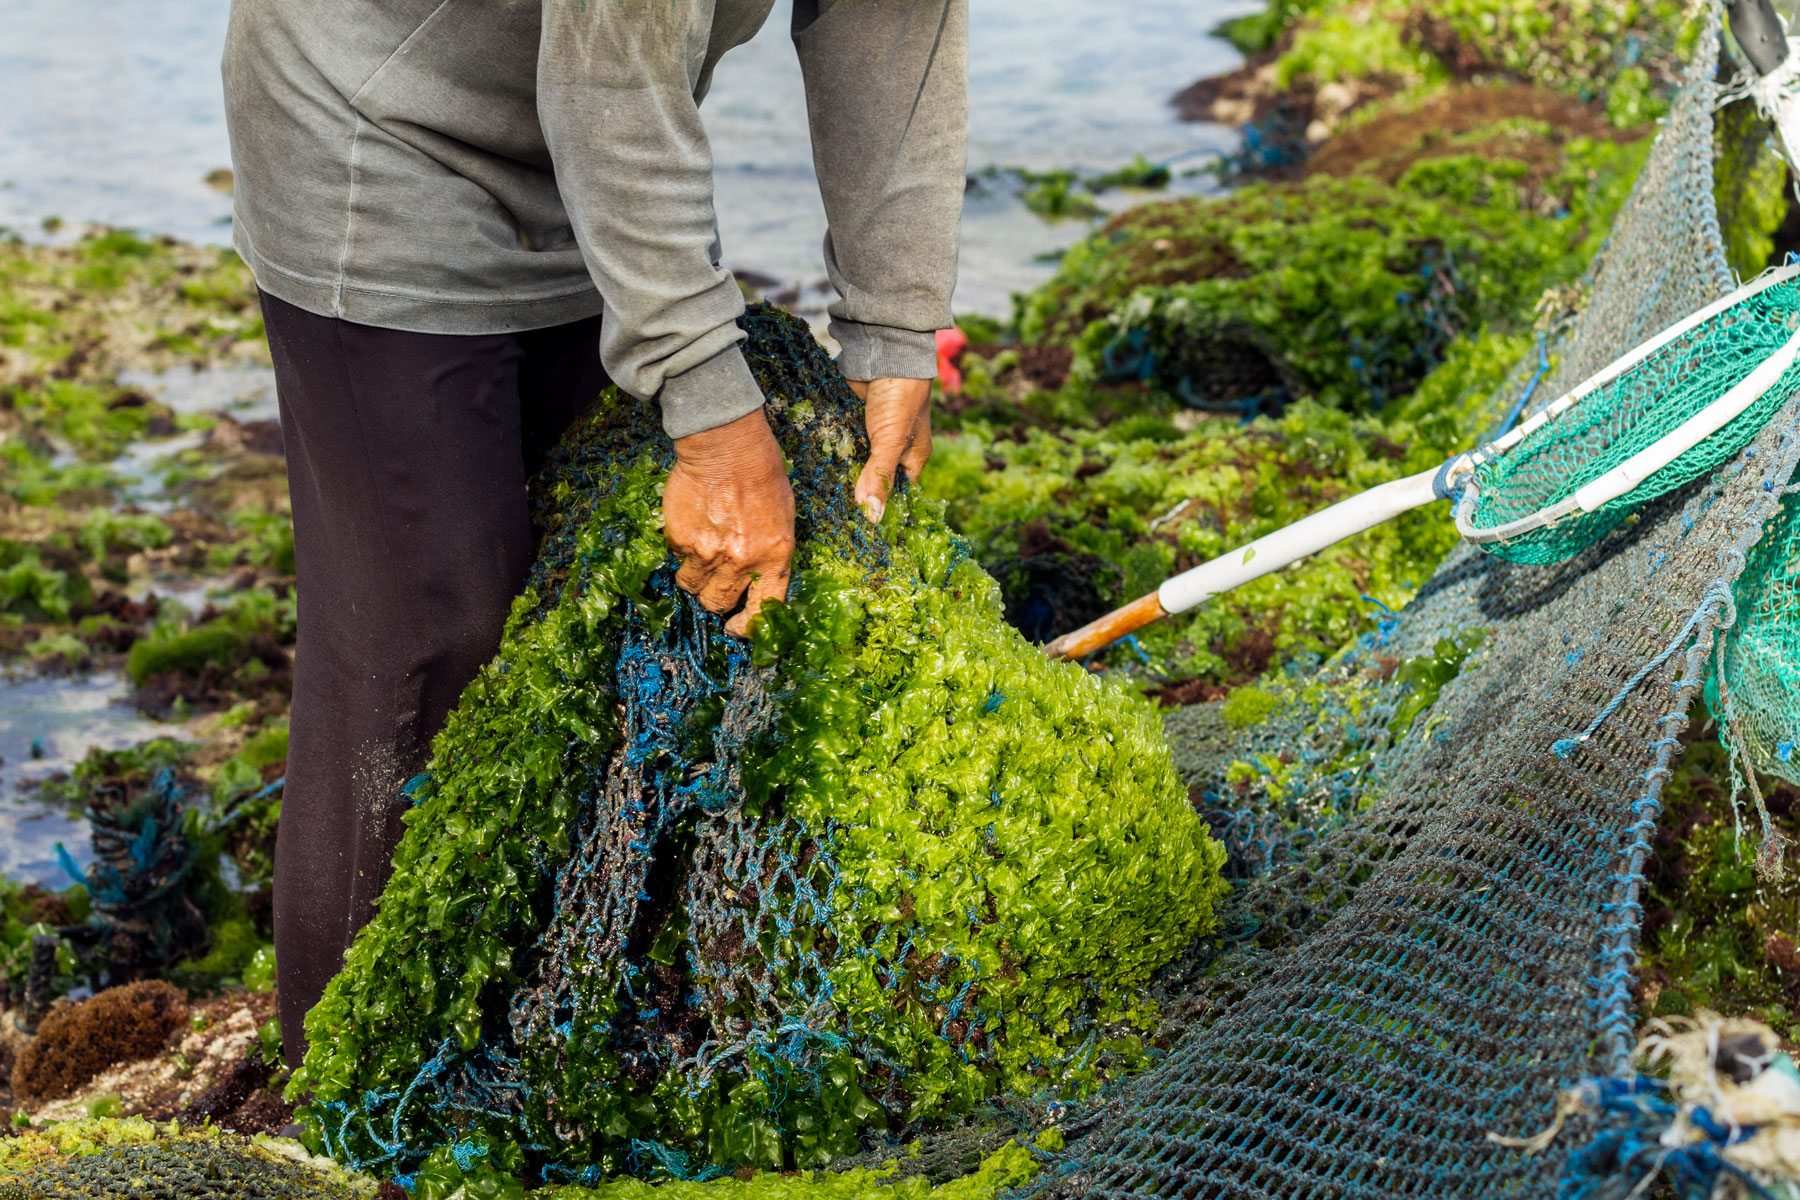 Seaweed Farming – An interview with Mollie Gupta at WWF